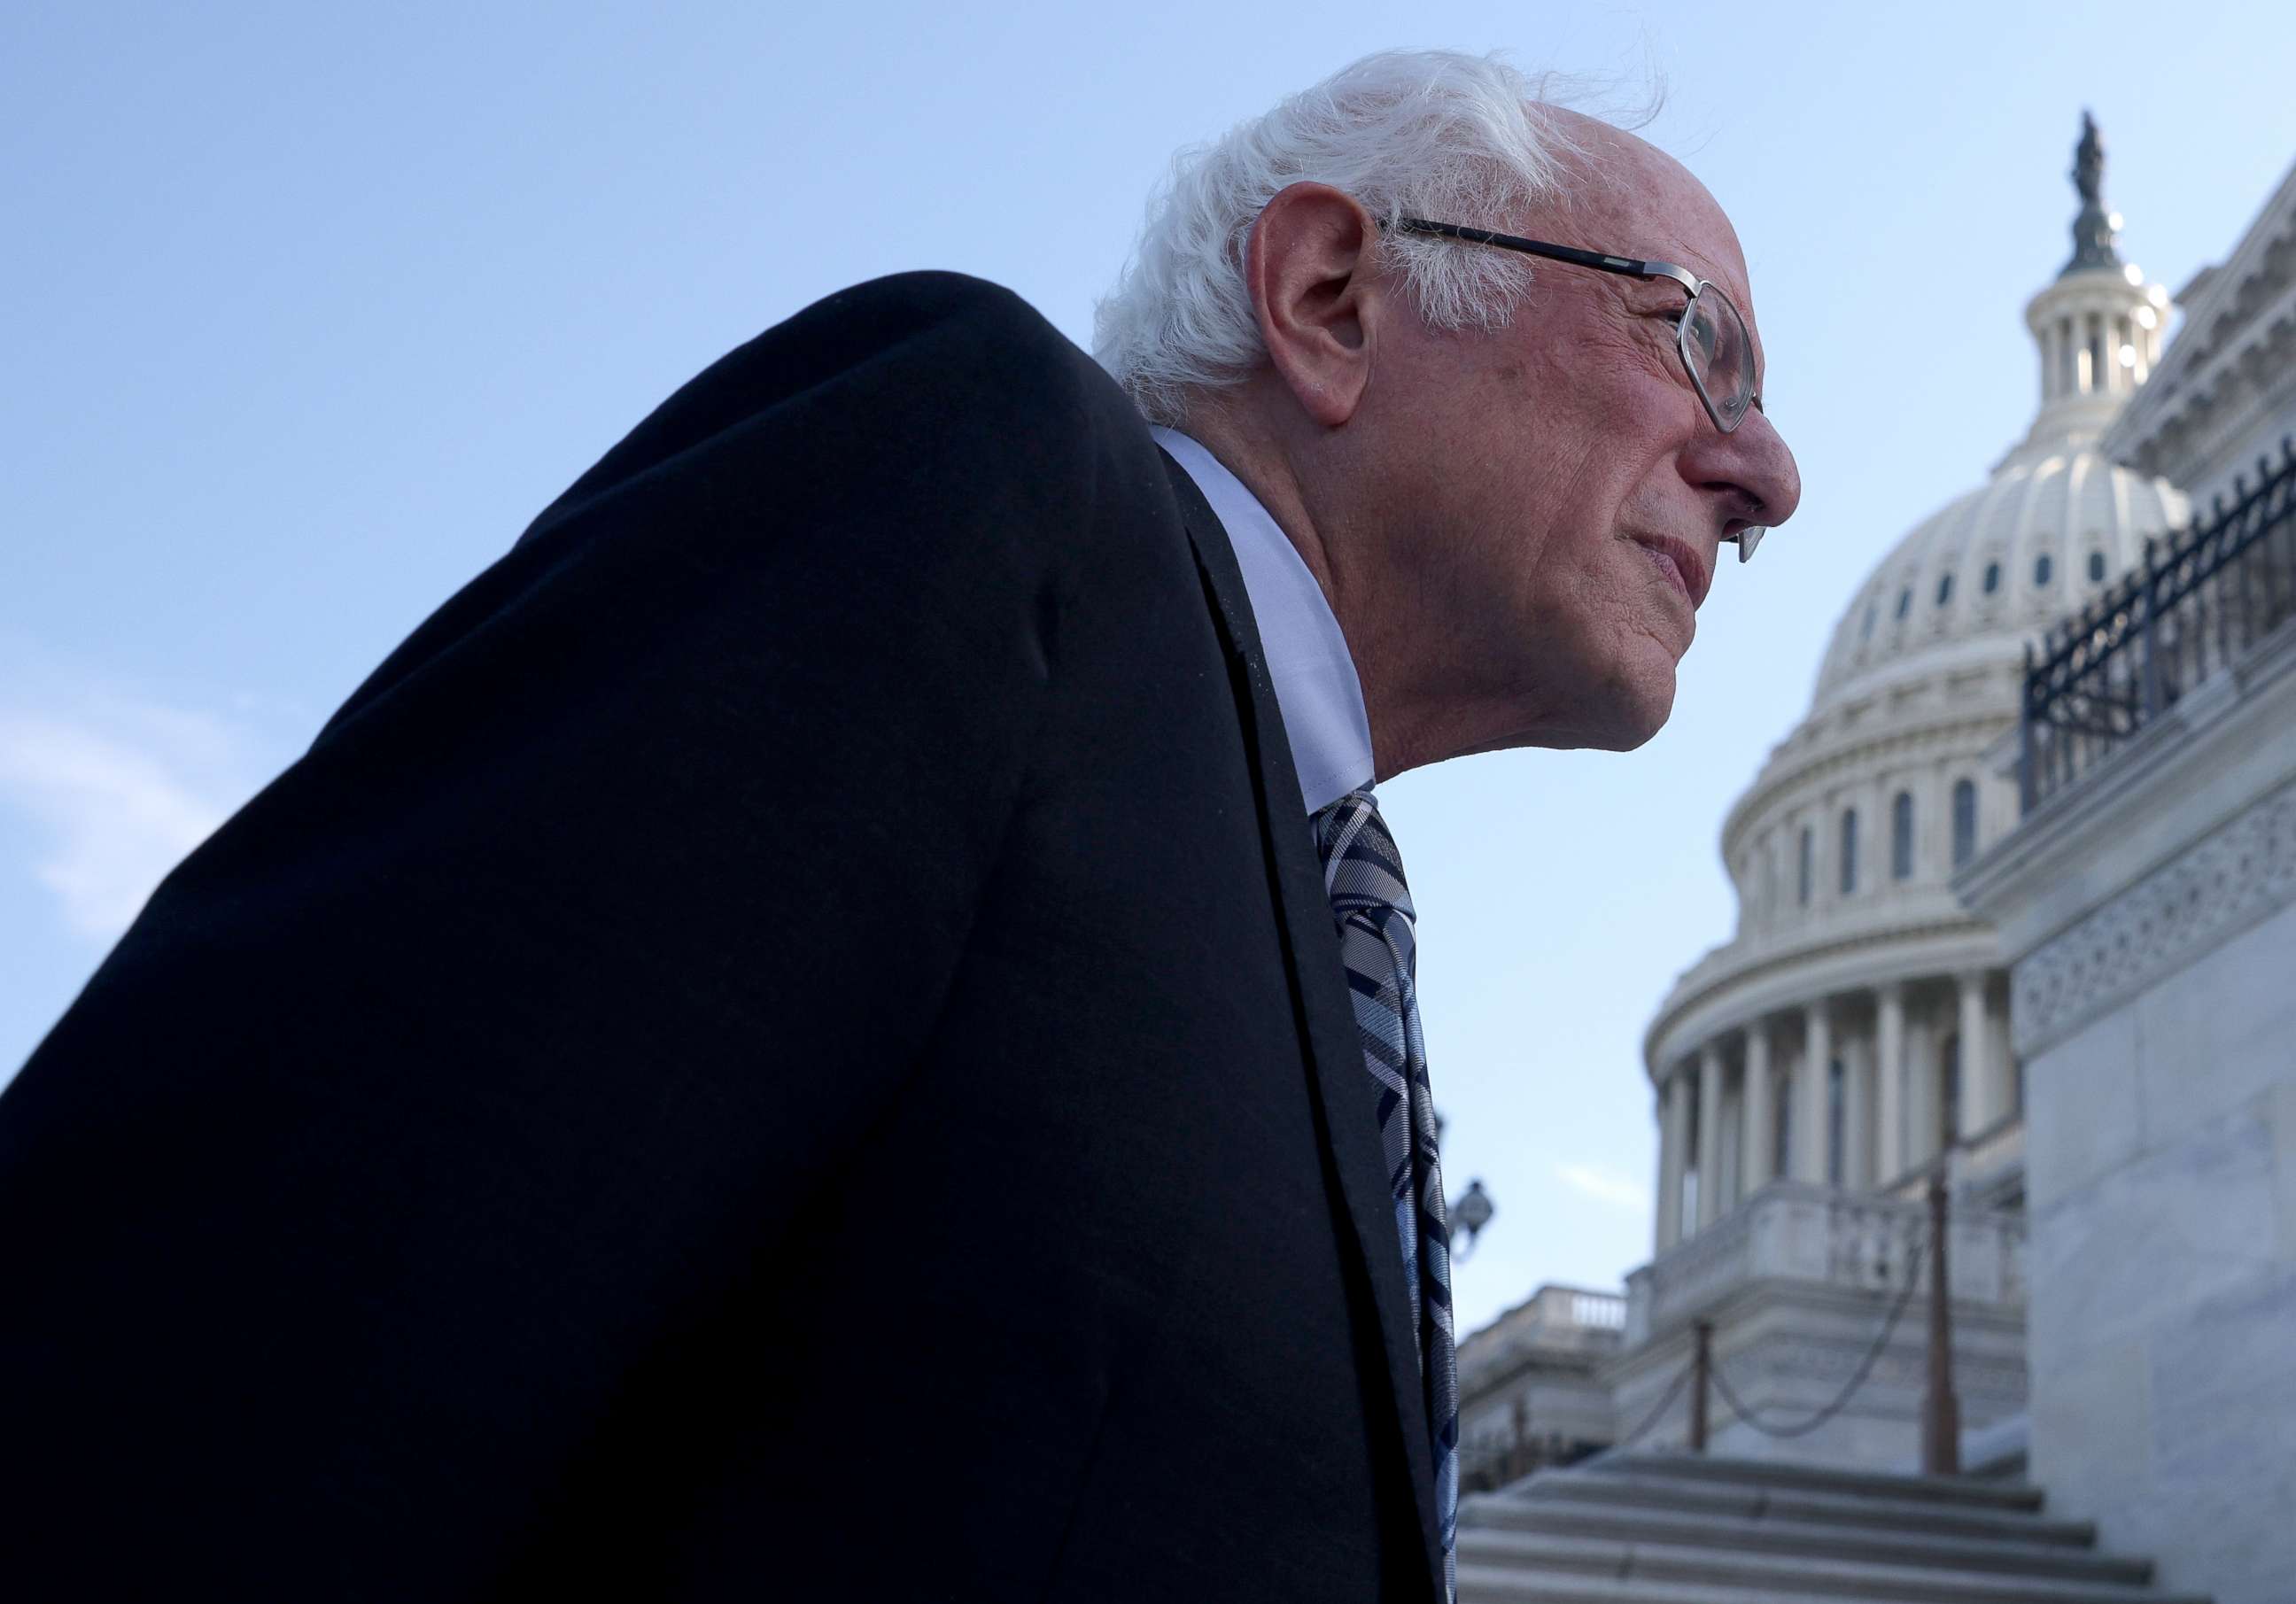 PHOTO: Sen. Bernie Sanders arrives at the Capitol after meeting with President Joe Biden at the White House on July 12, 2021 to discuss infrastructure legislation.